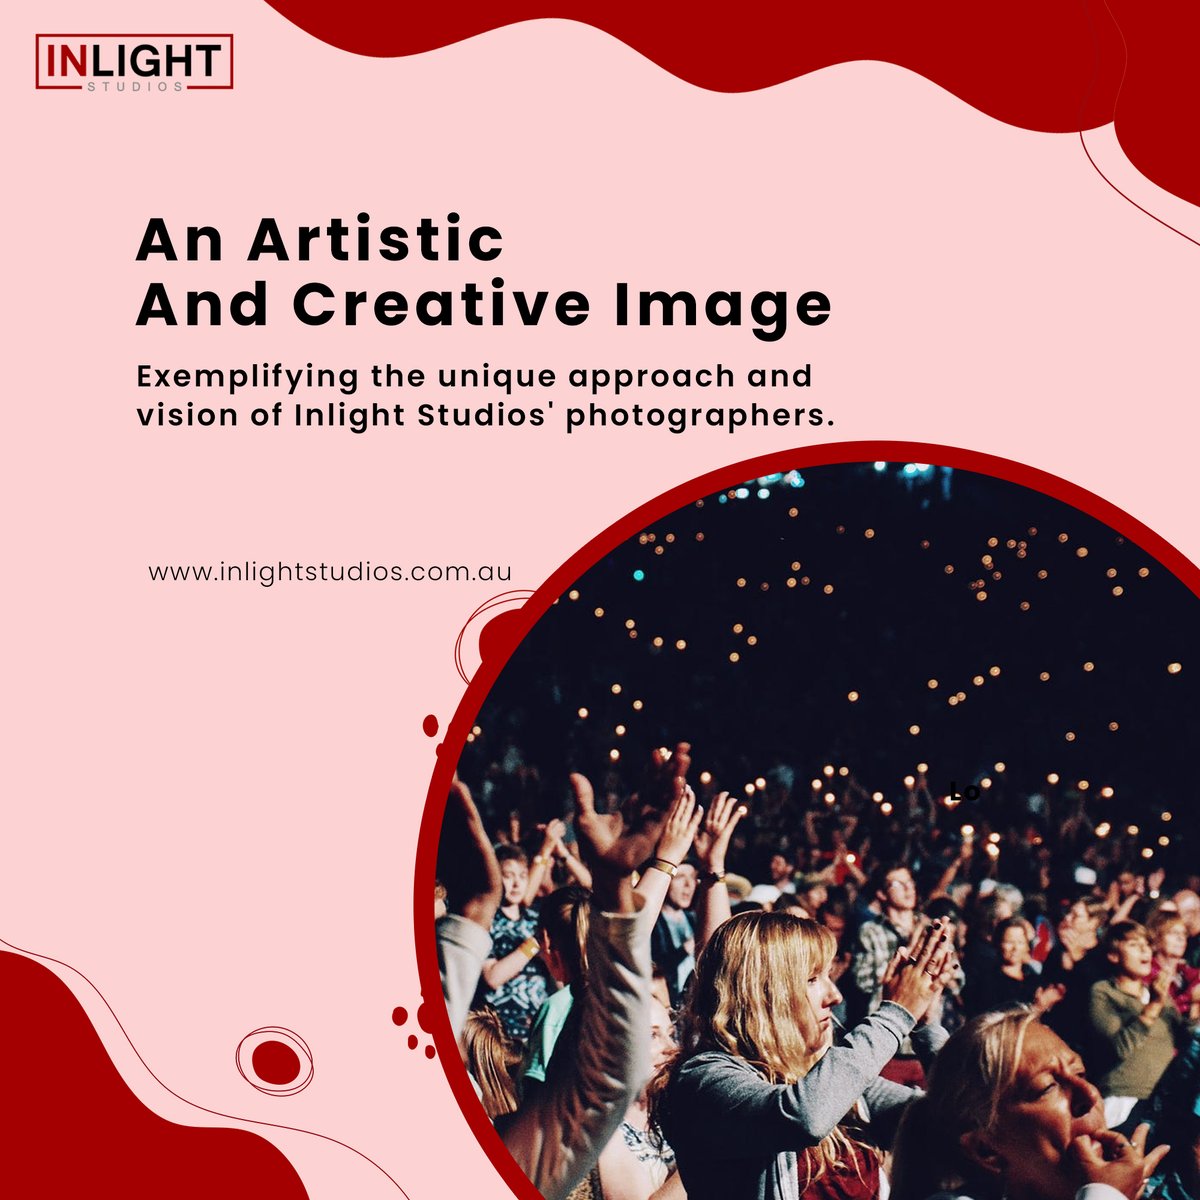 Step into a world of imagination and inspiration with Inlight Studios -where artistry meets innovation. 

#CreativeVision #inlightstudios #artistrymeetsinnovation #imaginationinspiration #creativejourney #innovativecreativity #inspiredbyinlightstudios #imaginativeartistry